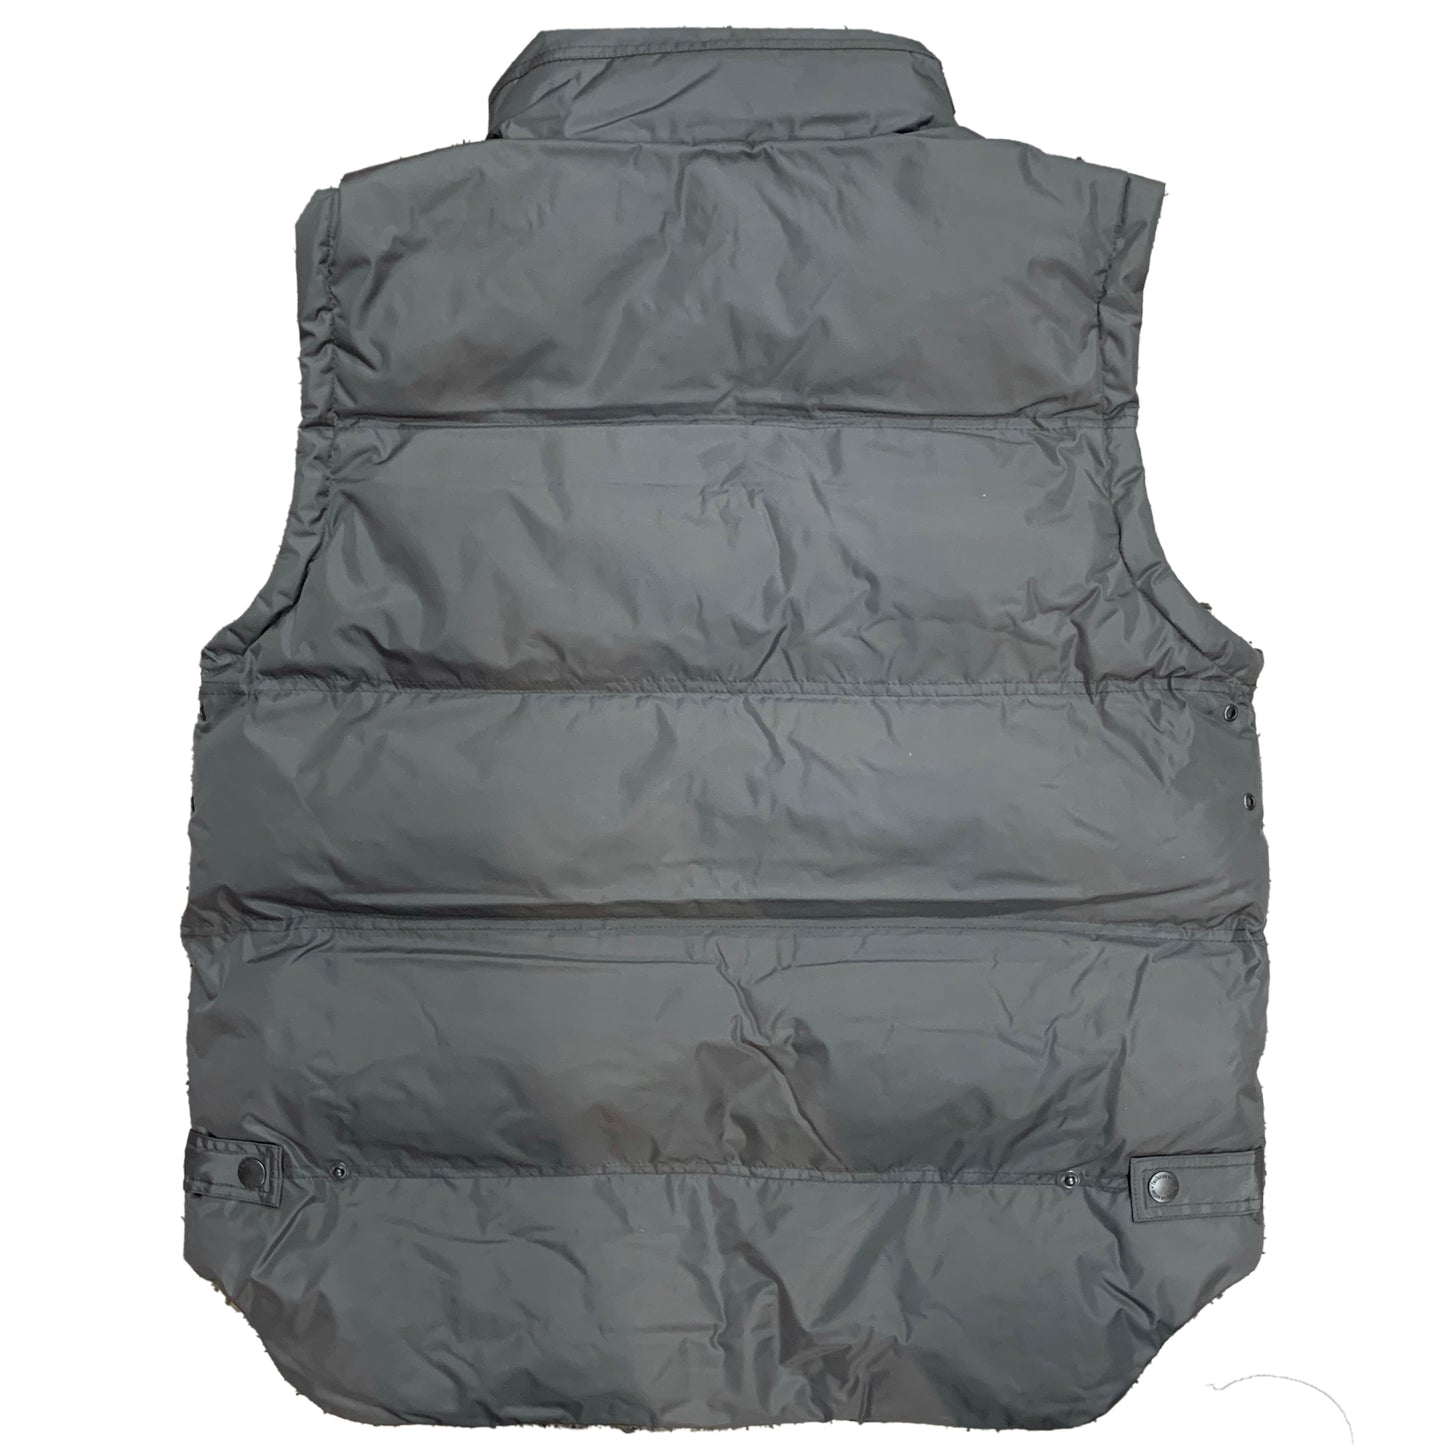 Oversize Charcoal Grey Puffer Vest